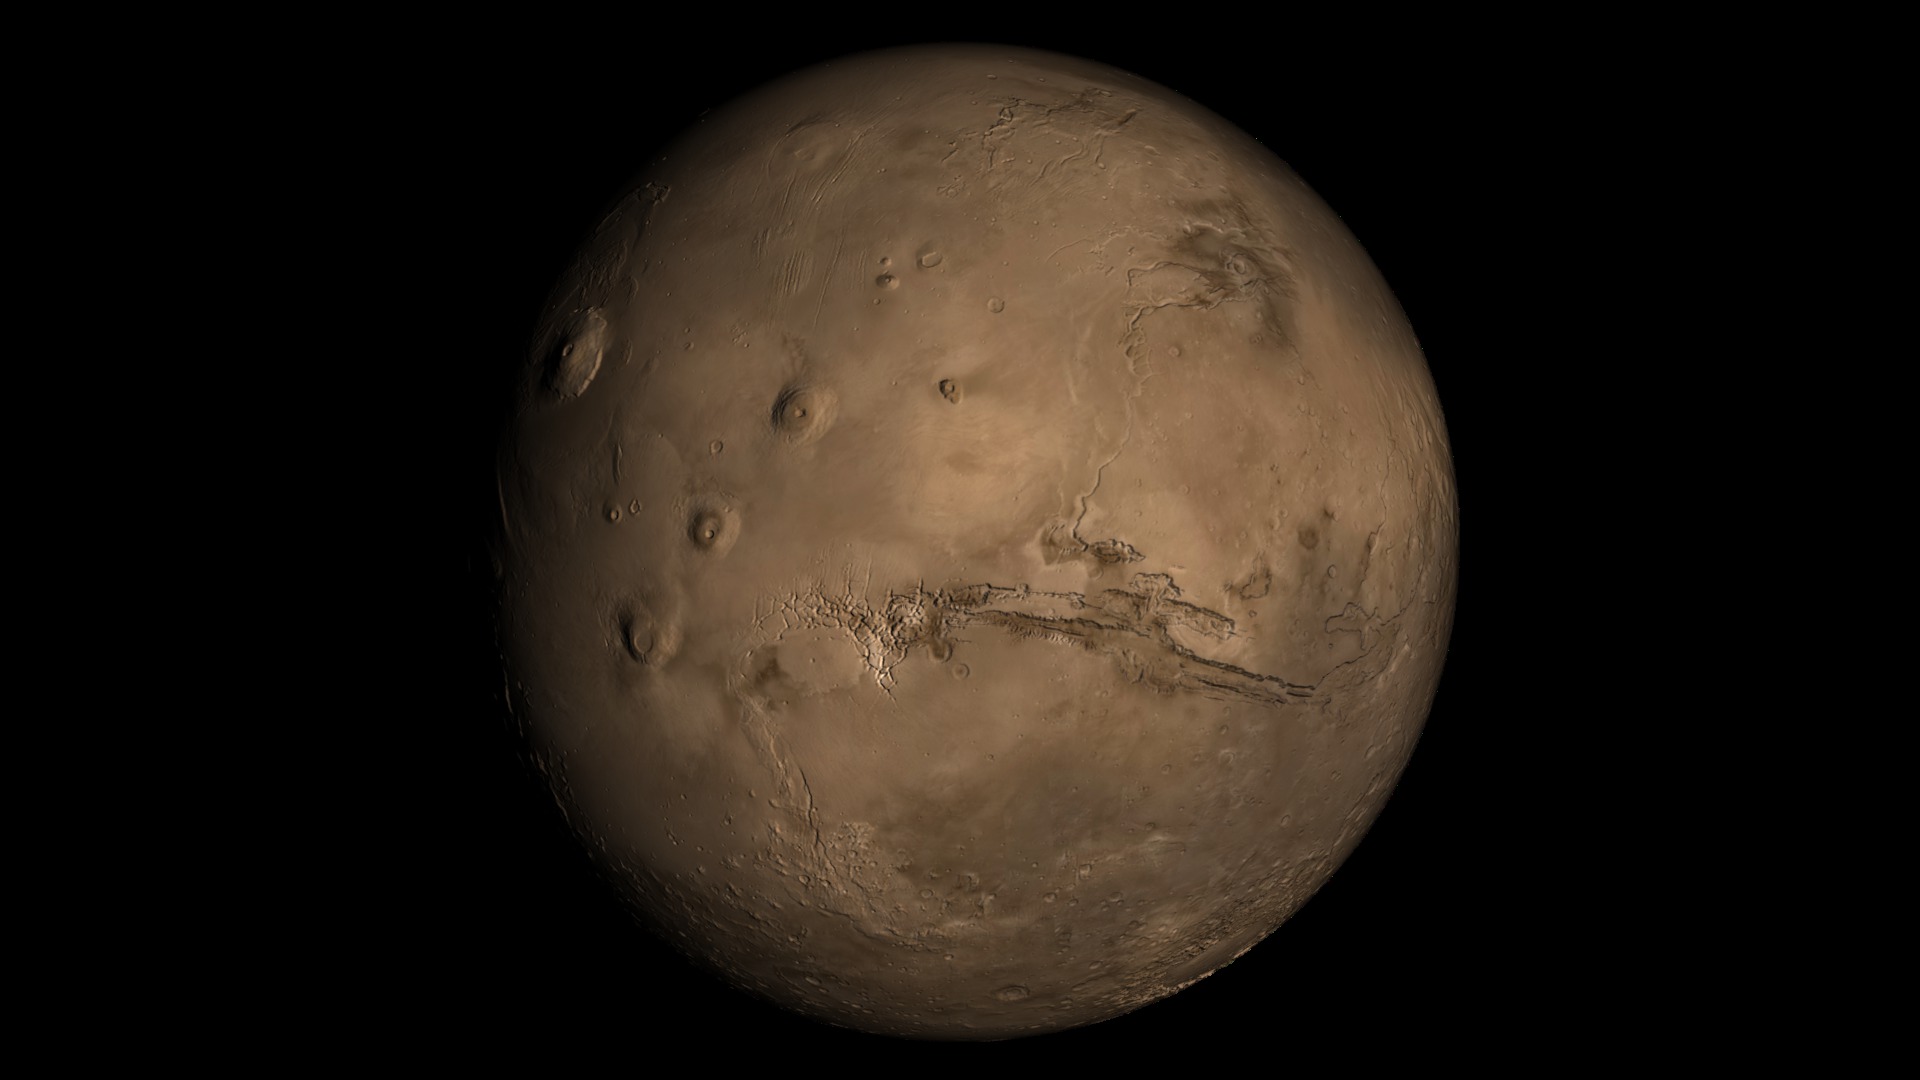 Animation that rolls Mars around to show all the major features of the Martian topography.  This animation begins with a hemispherical view of Olympus Mons and Valles Marineris and then rolls around to reveal the Martian South Pole.  While traversing Northward, we pass Hellas Basin and end up looking down up the Martian North Pole.